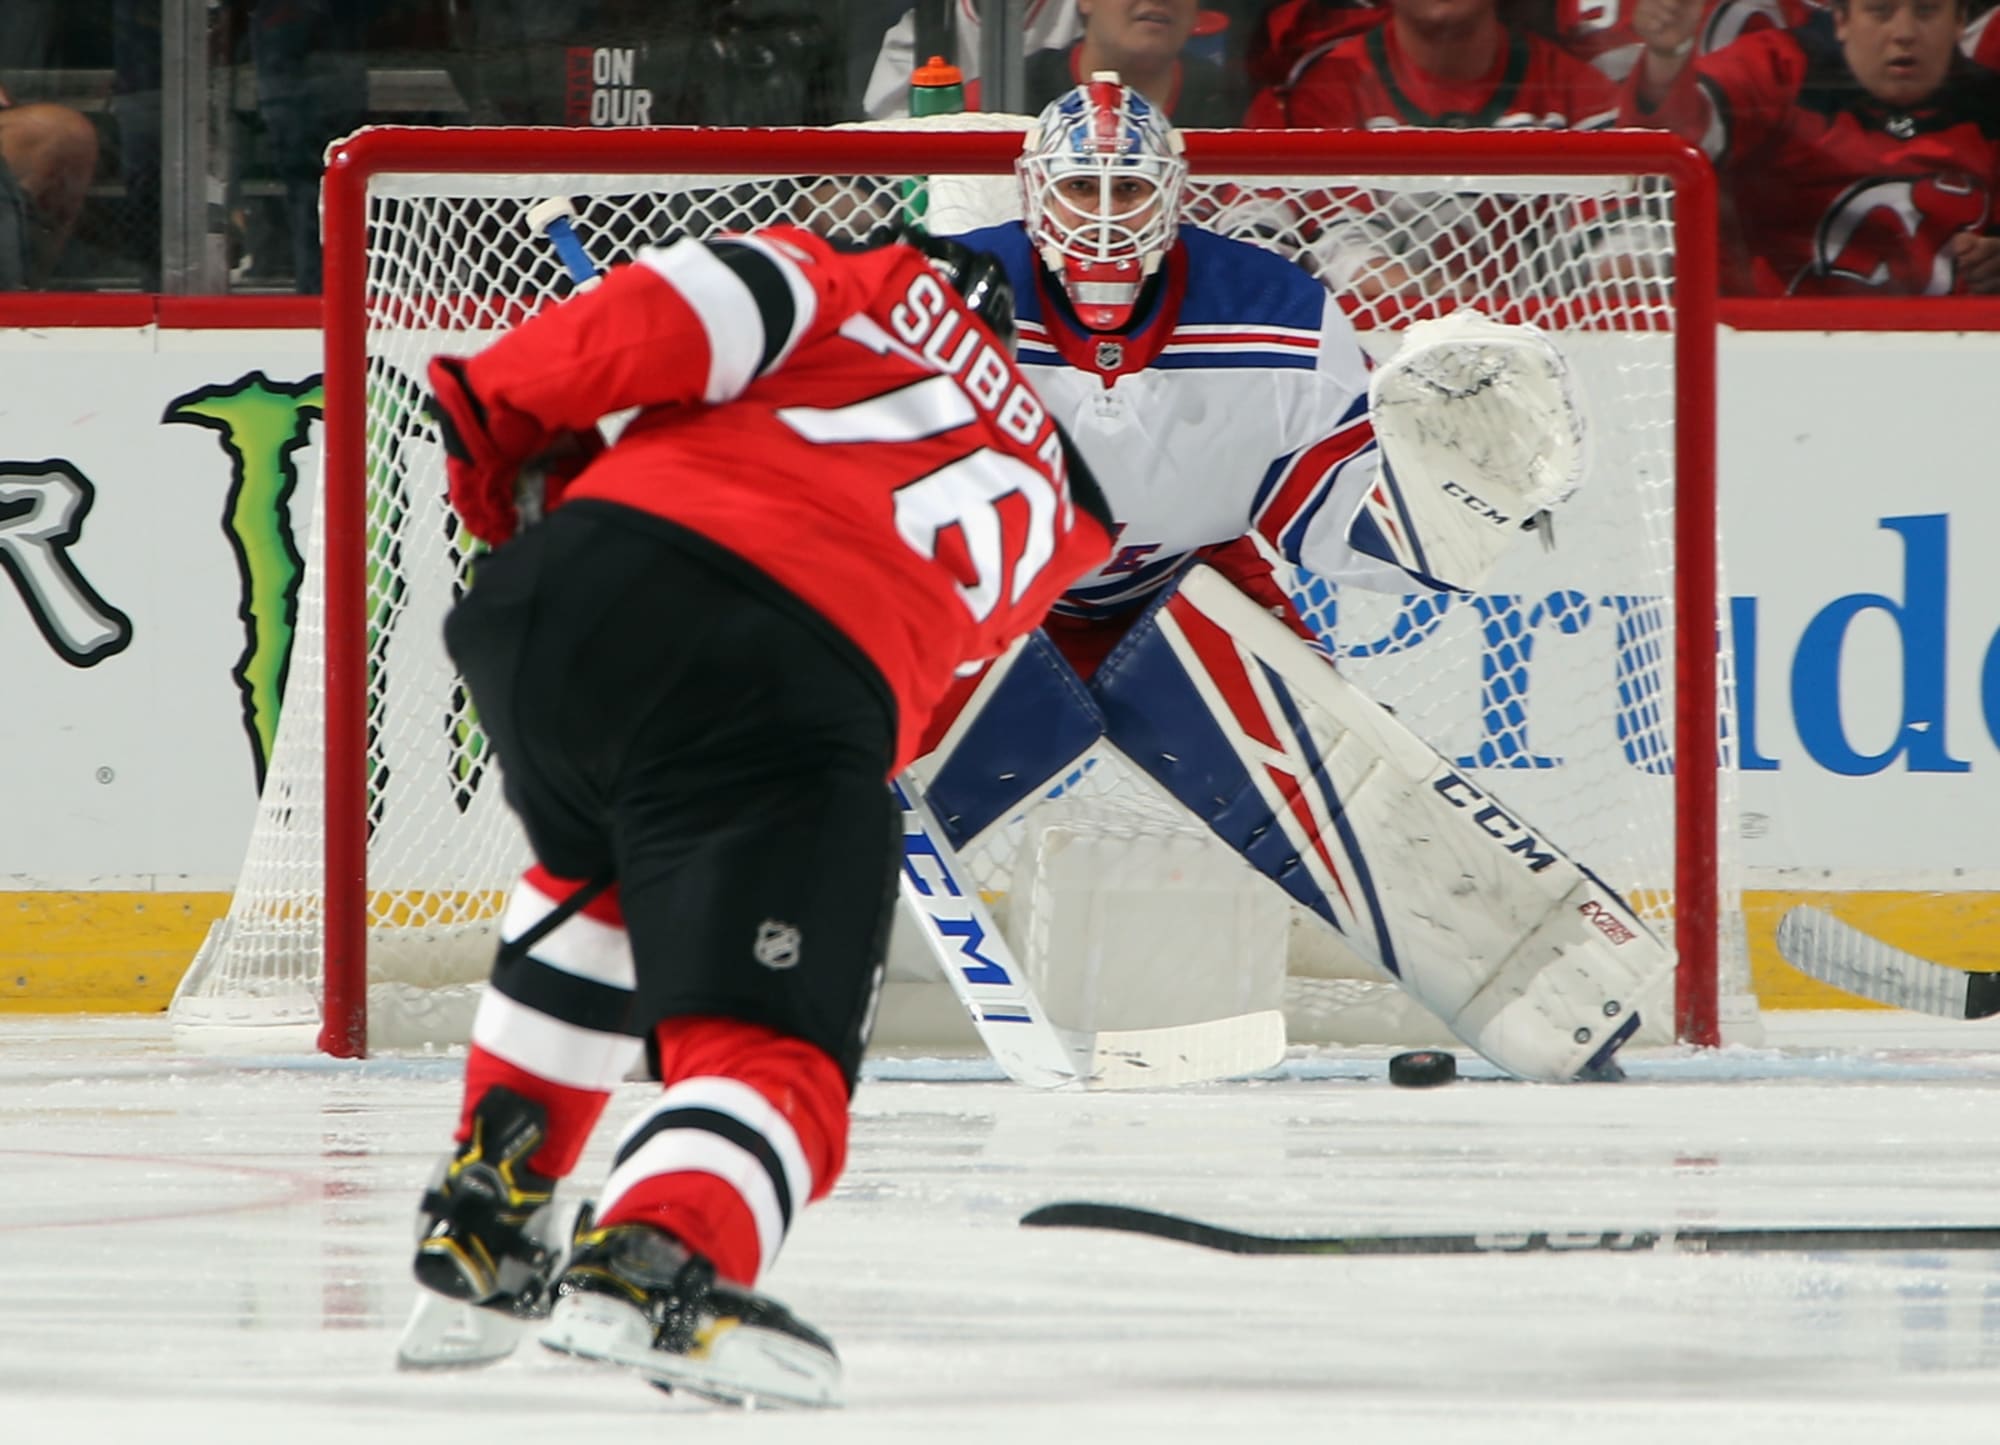 ESNY's 5 gif reaction to the New Jersey Devils win at the New York Rangers